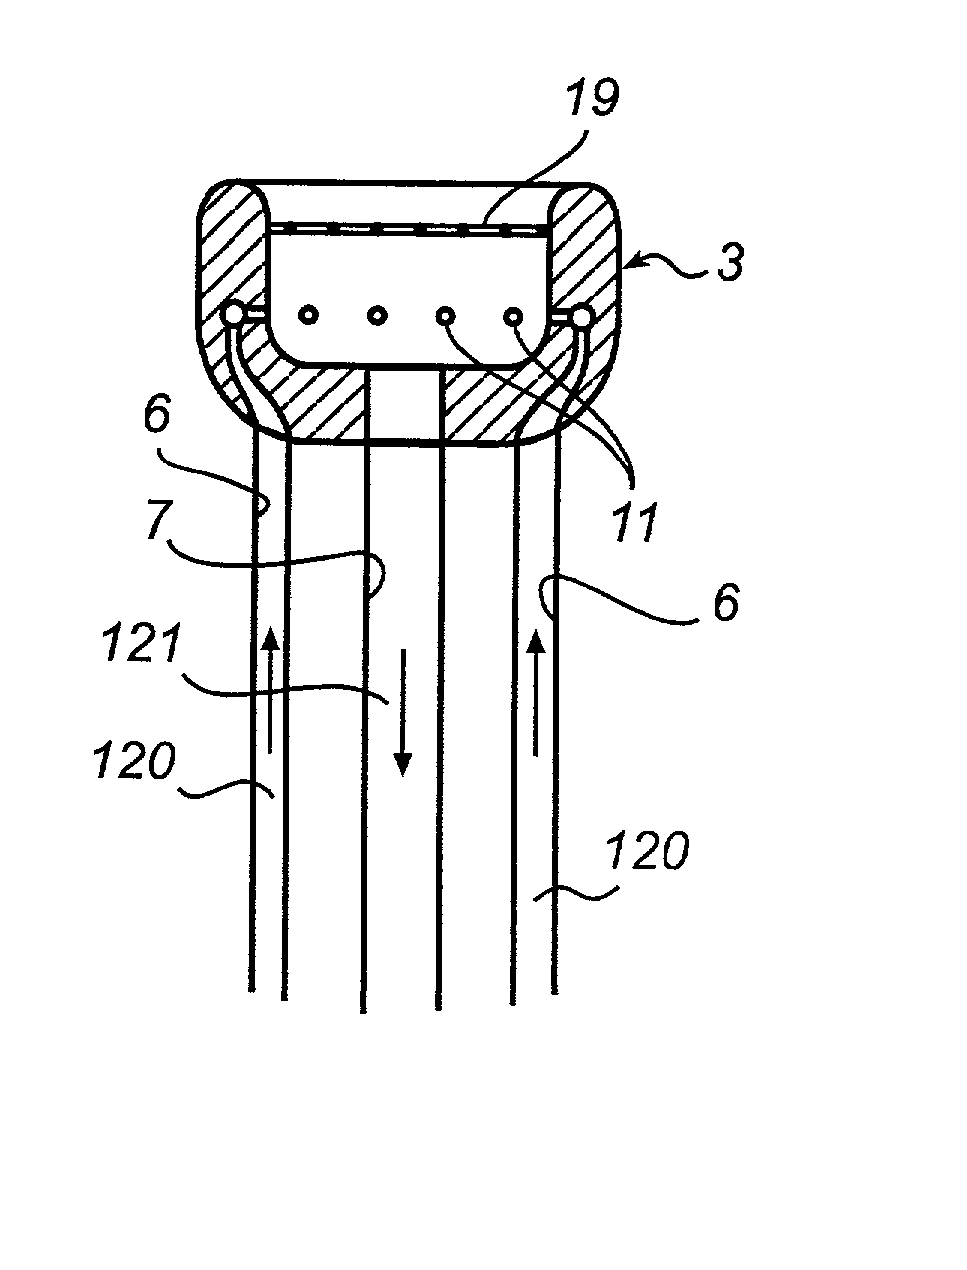 Method and device for treating inter alia the cervix